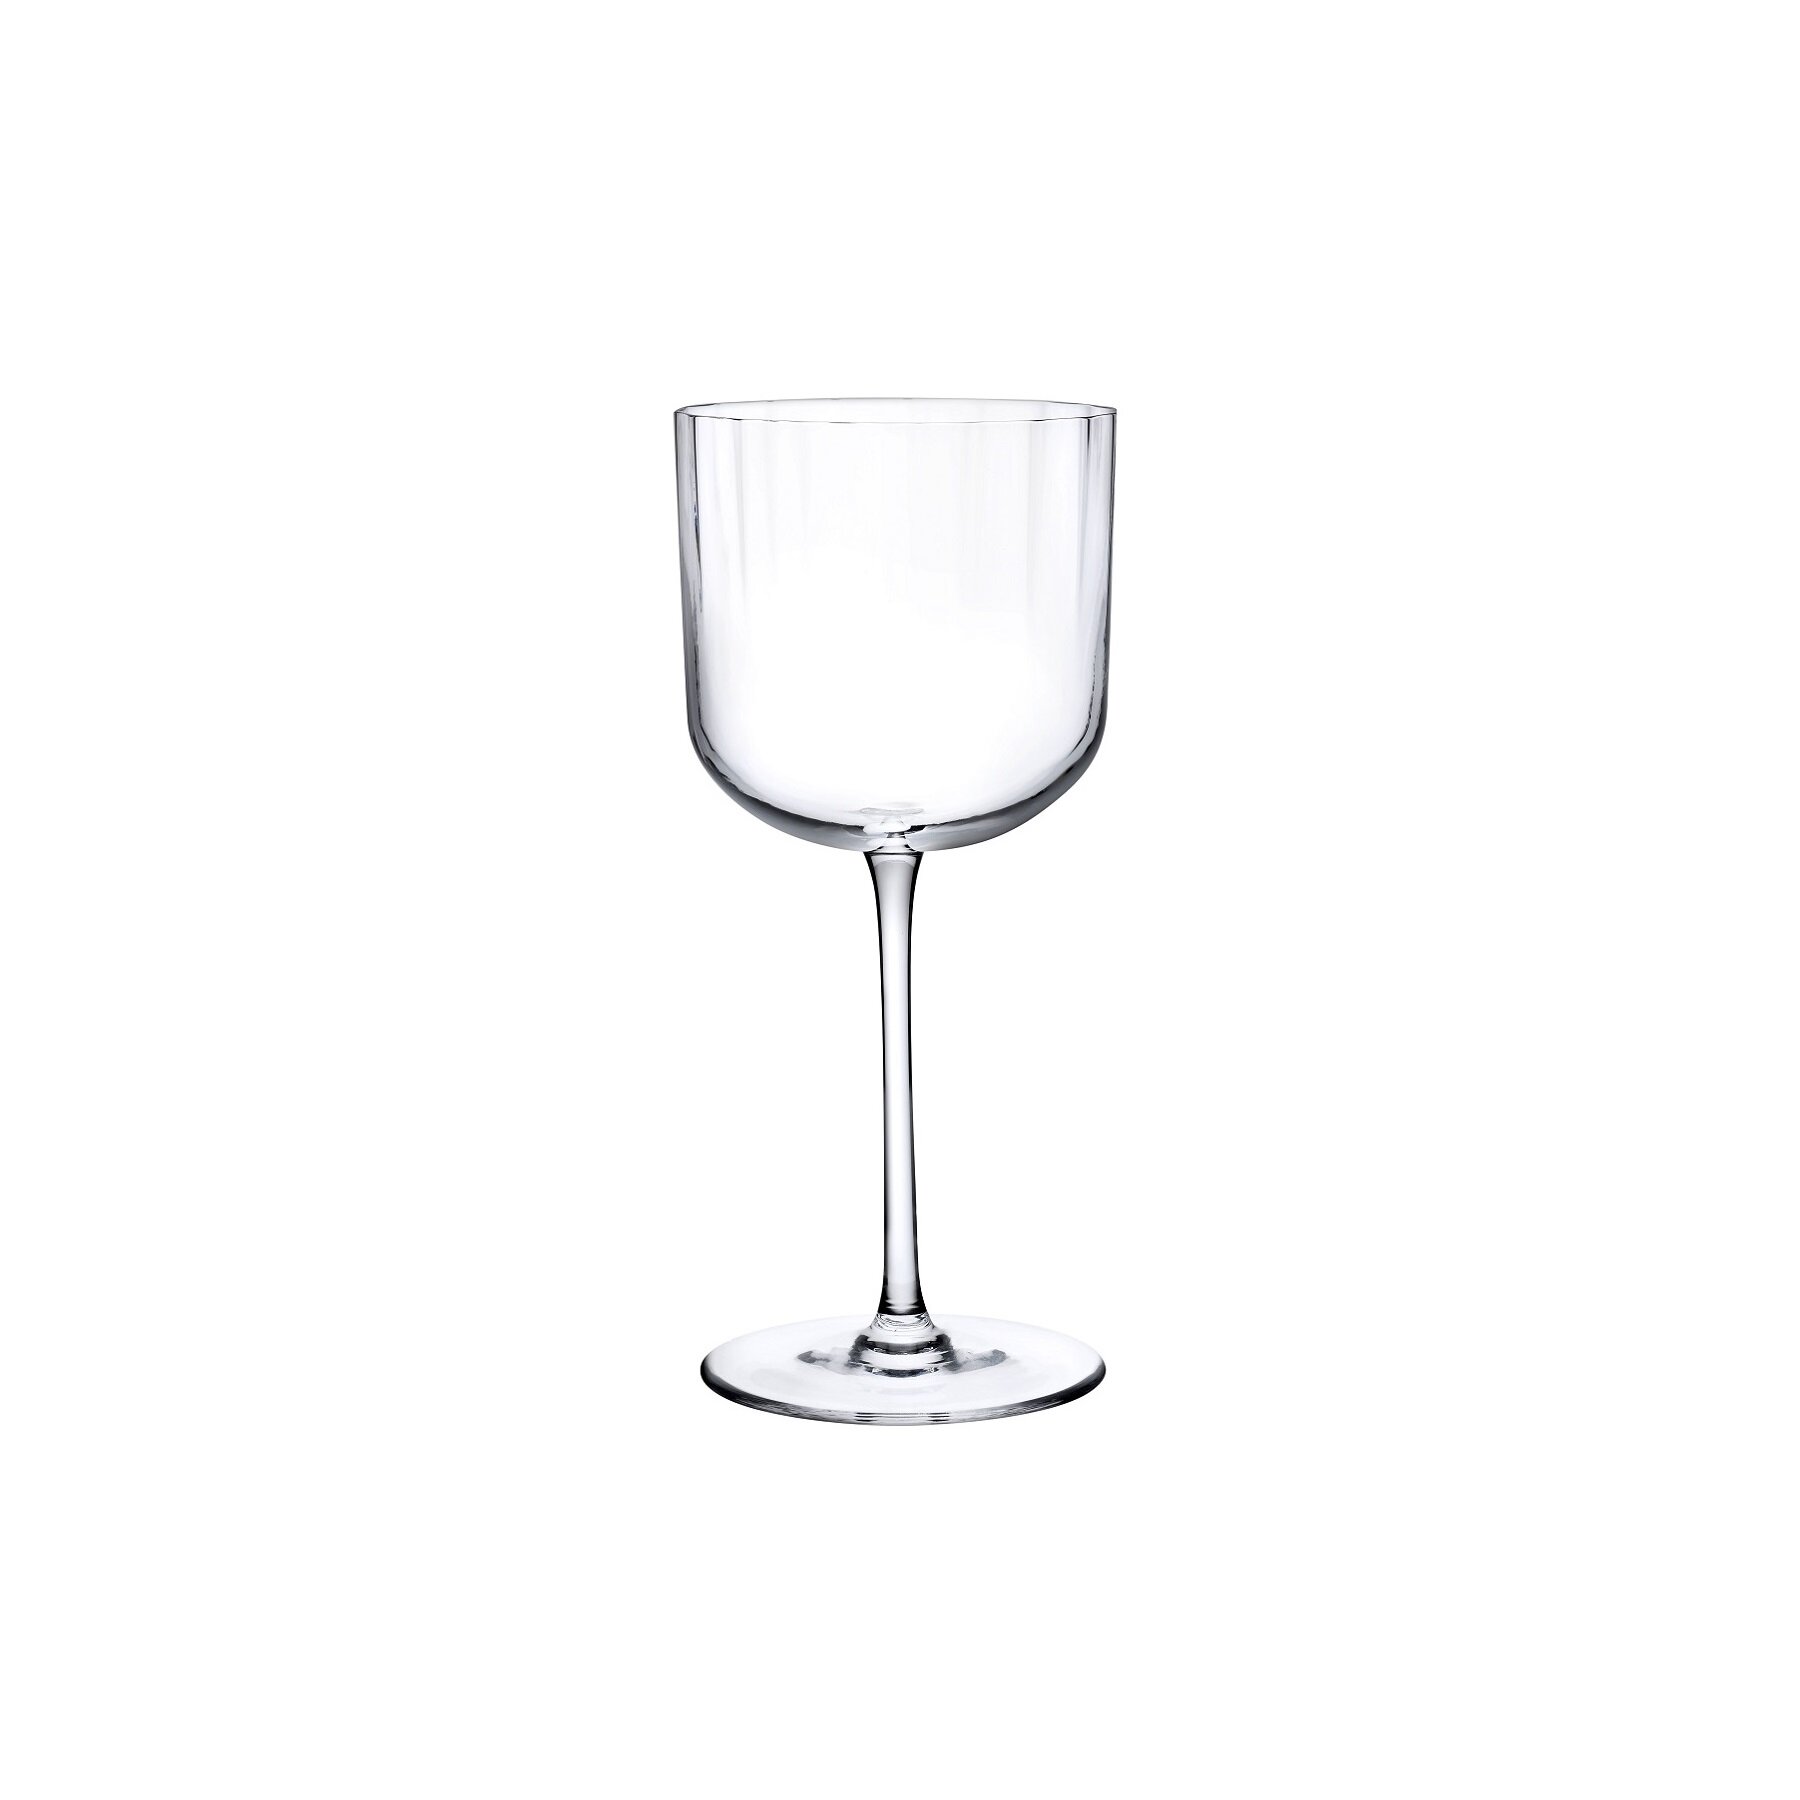 Crystal Wine Glasses, Wine Glass Sommeliers Will Love - 18oz, Set